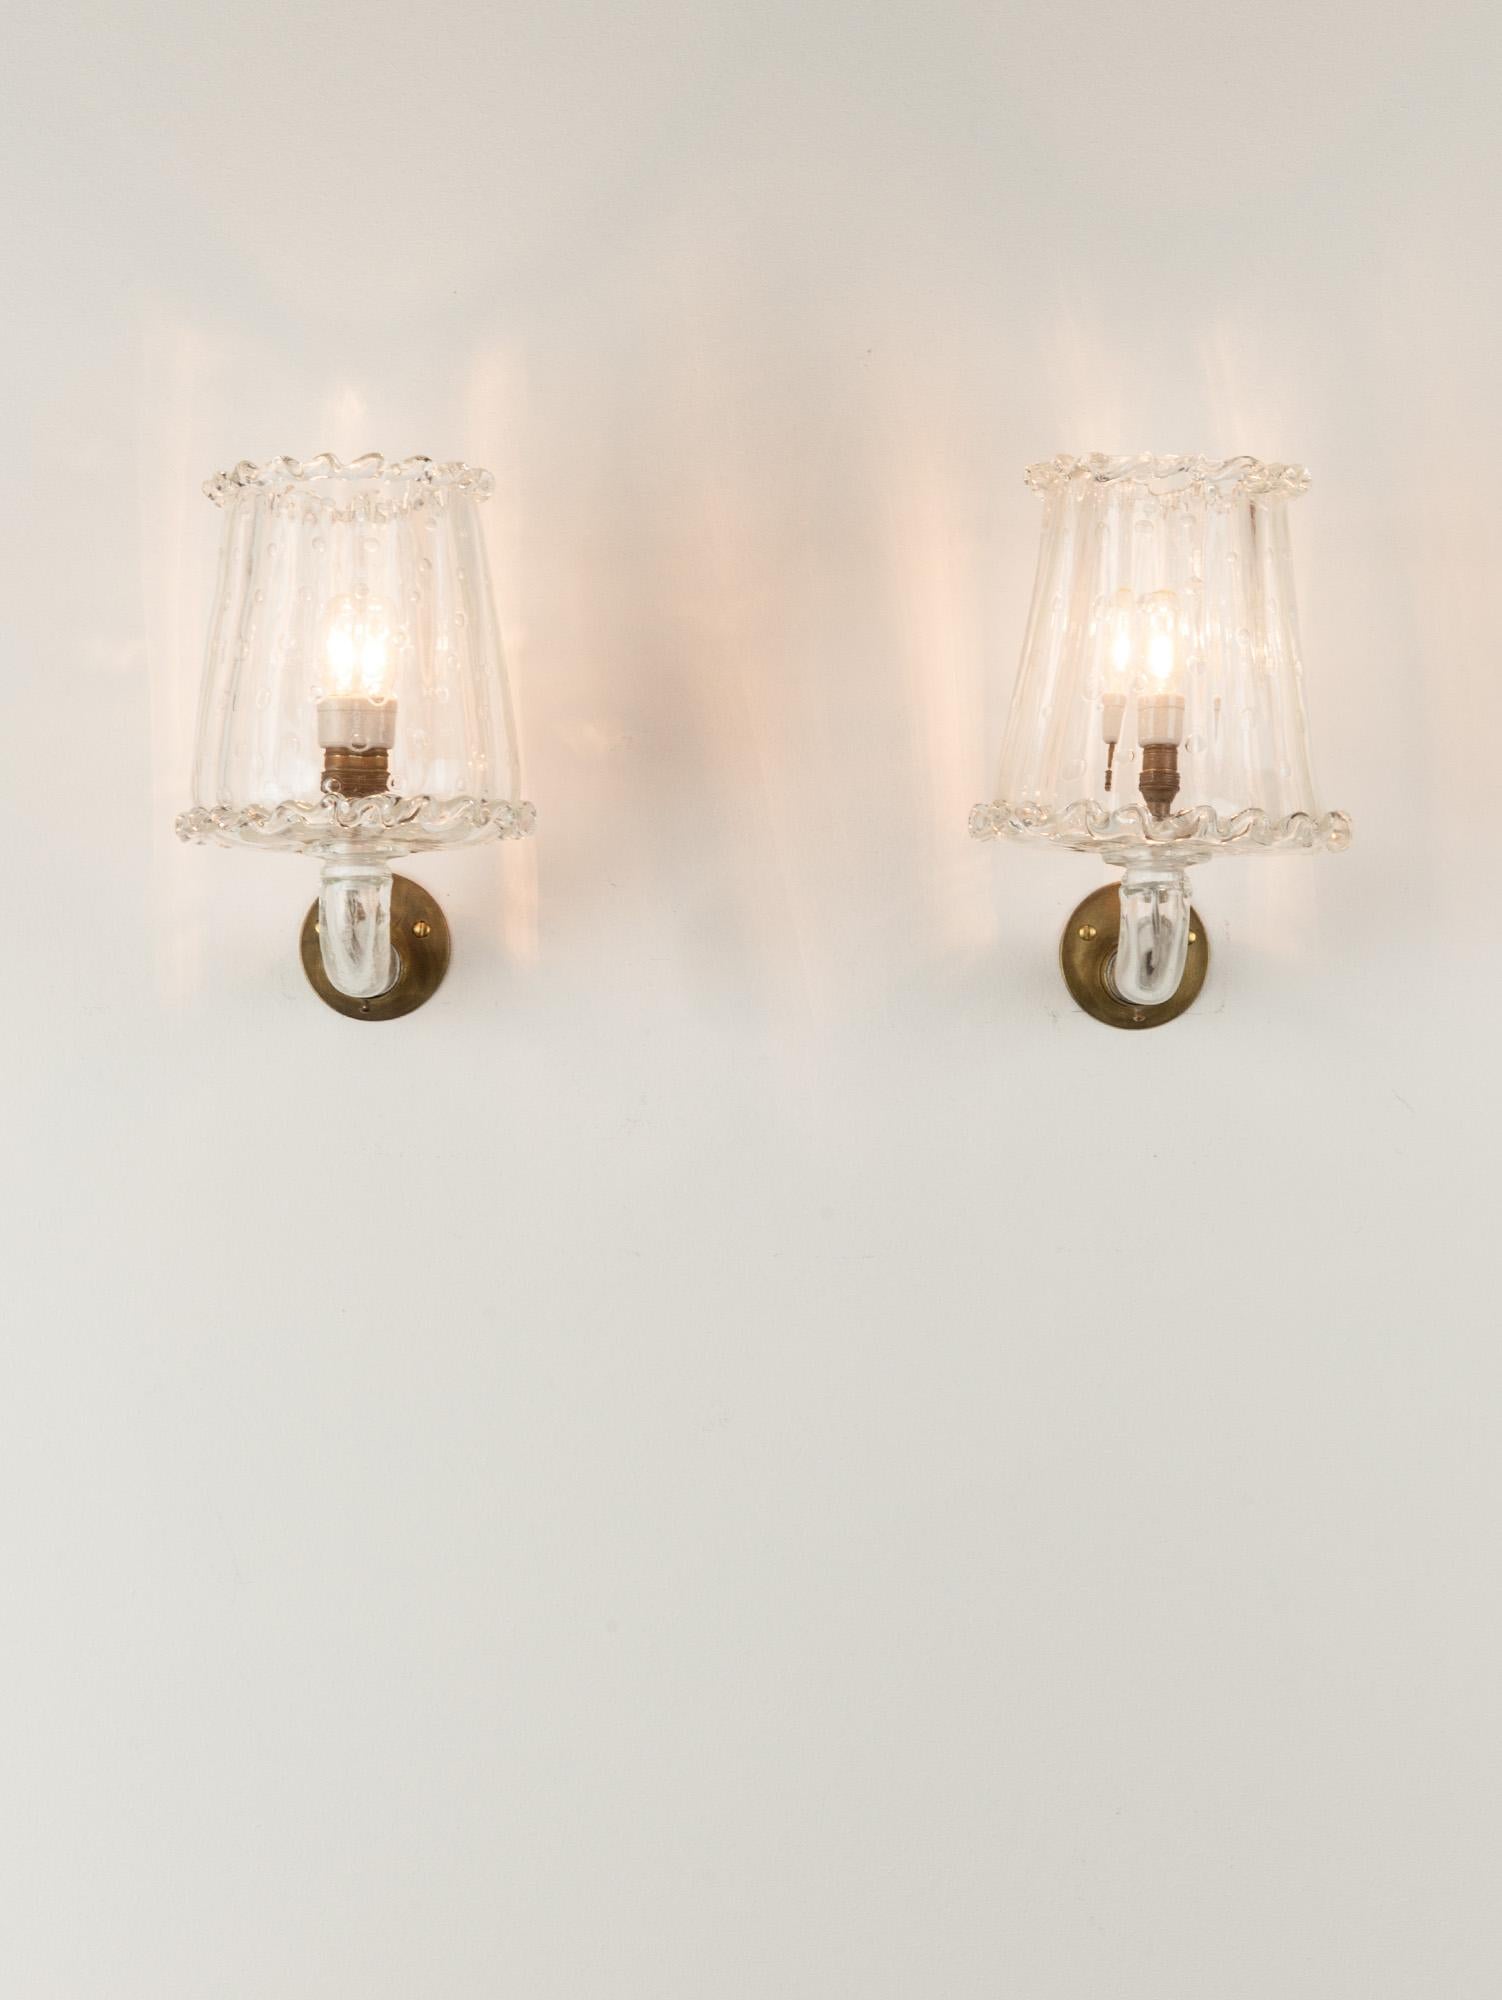 
Sweet and elegant pair of Italian Murano wall lights by Barovier with a ‘Bullicante’ glass shade and brass fixtures. The molded glass shade has lovely wavy detailing on its edges and a soft and delicate bubble texture. The curved stem is also made